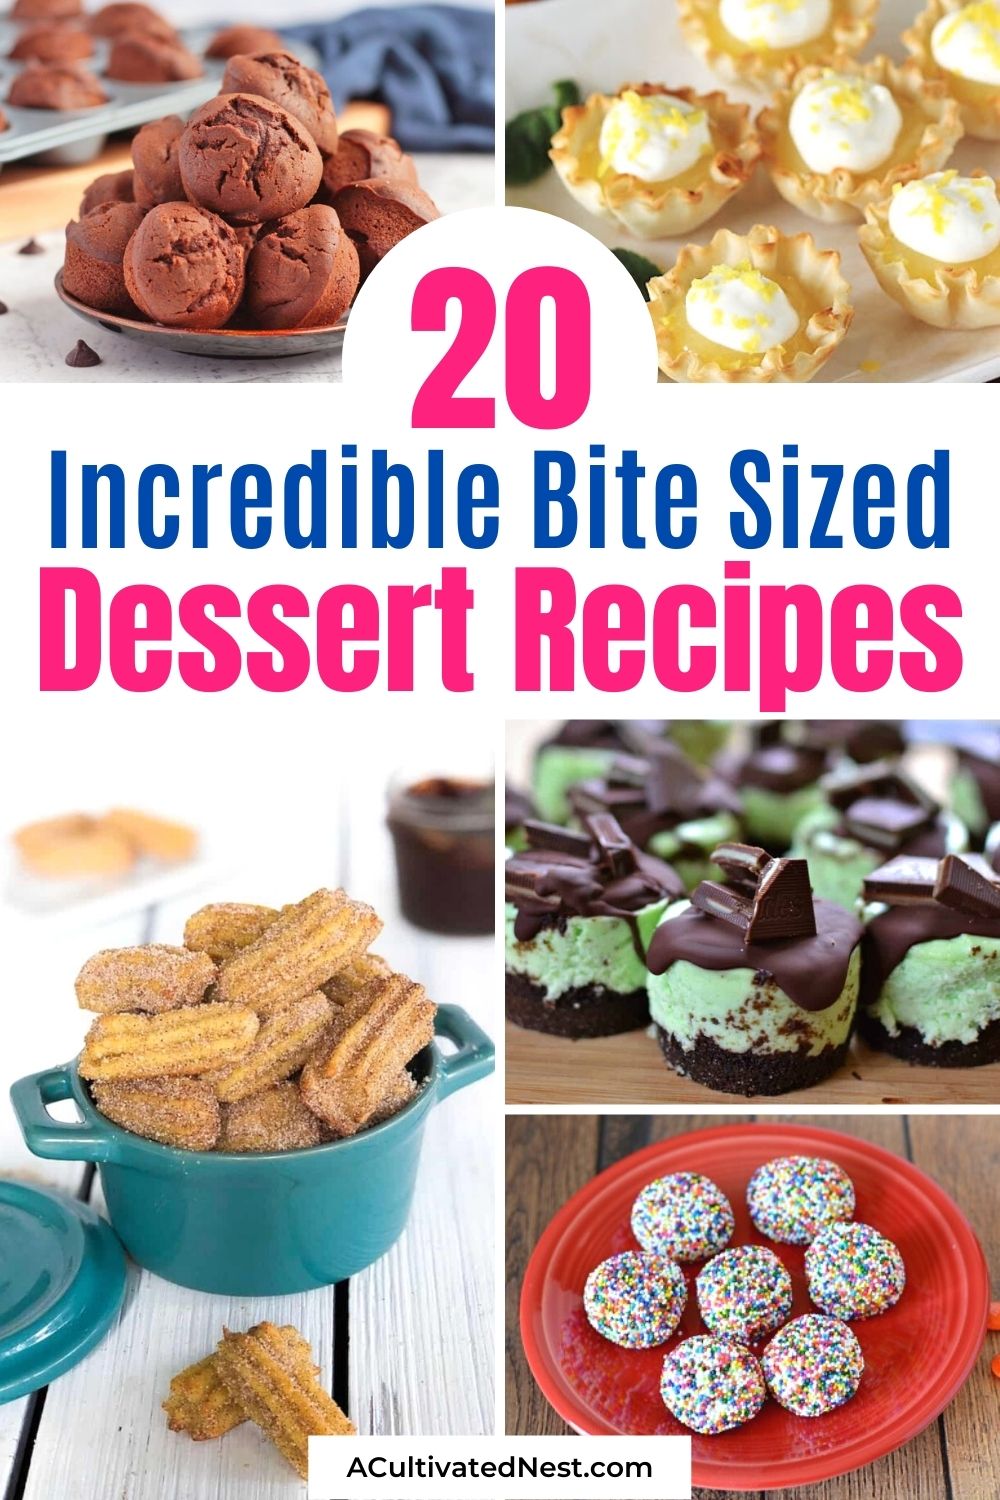 20 Incredible Bite Sized Dessert Recipes- If you want a great dessert to serve a crowd, then you need to check out these 20 incredible bite sized dessert recipes! They're all super easy to make, taste delicious, and are sure to be a big hit! | small desserts, desserts for parties, #desserts #dessertRecipes #smallDesserts #biteSizeDesserts #ACultivatedNest